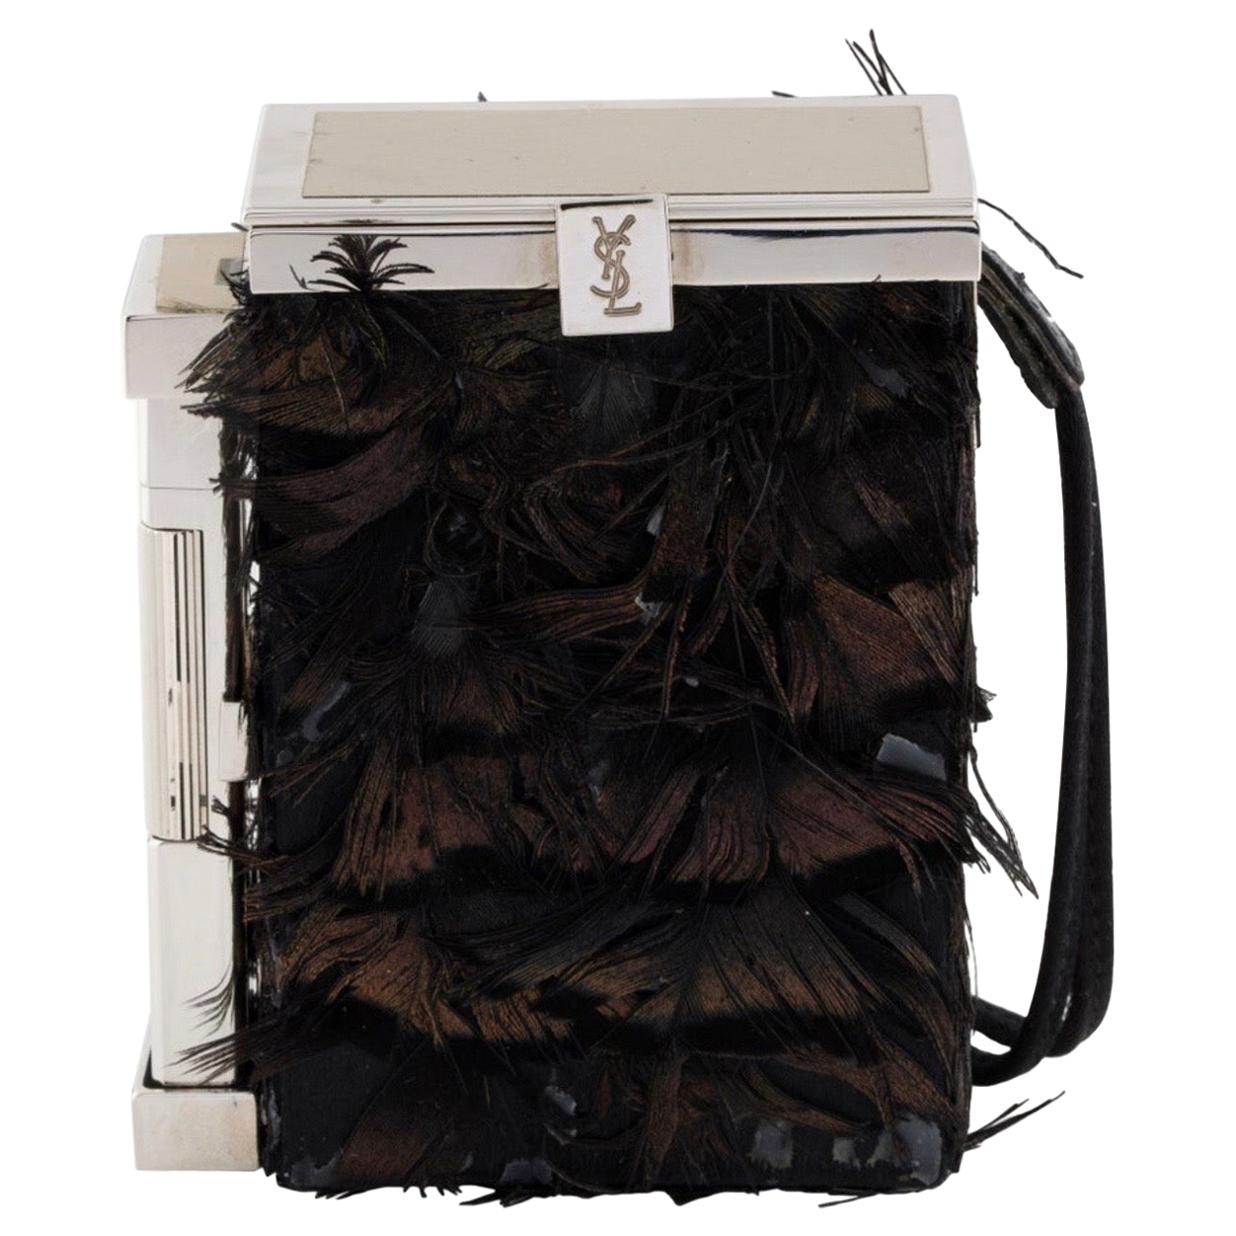 Yves Saint Laurent by Tom Ford feathered case with lighter